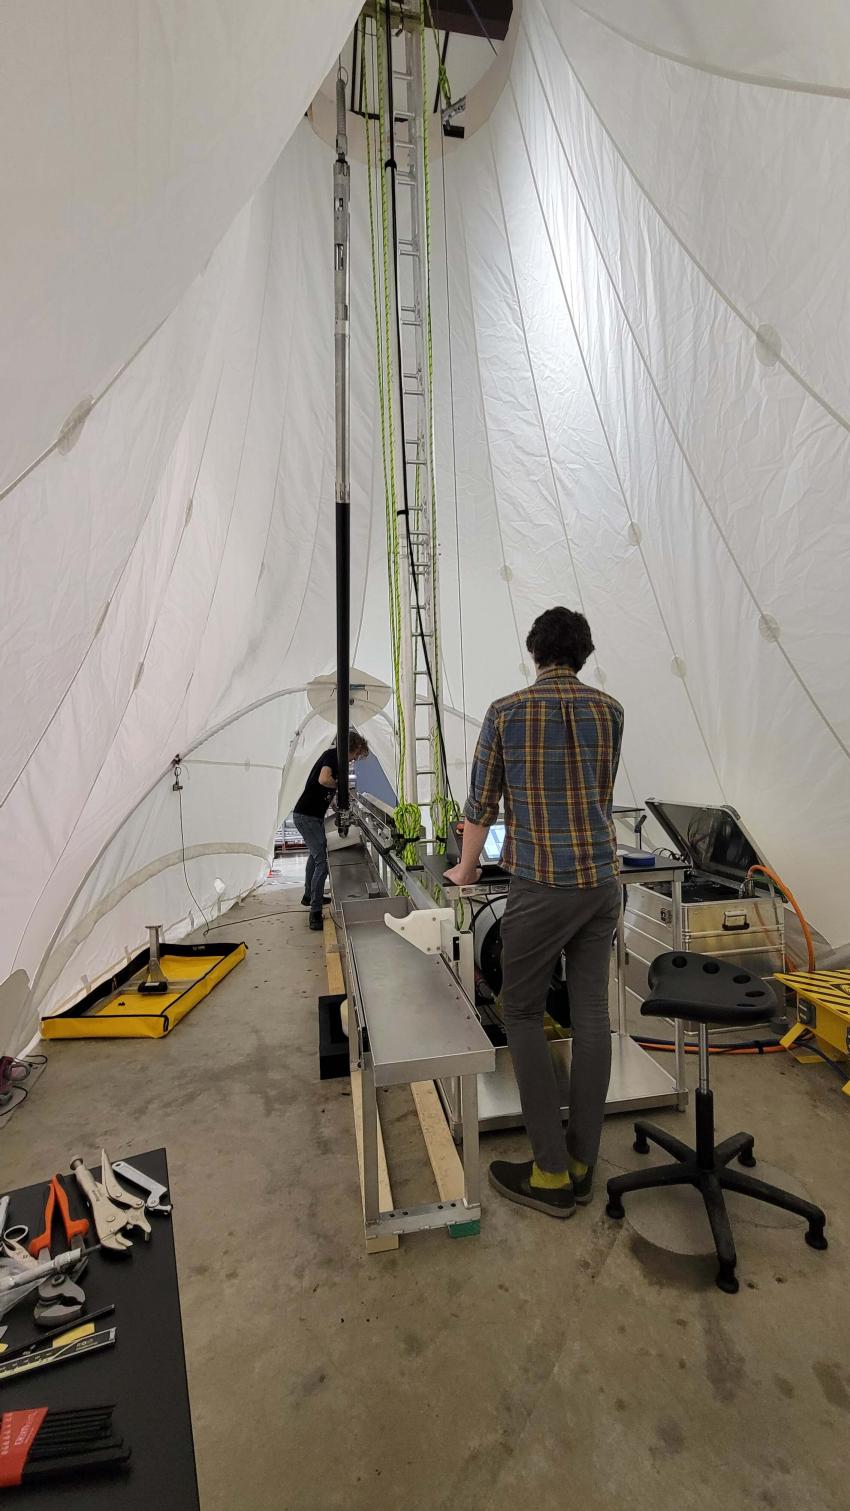 Interior view of the 700 Drill tent. The tent is set-up inside the Physical Sciences Lab at UW-Madison. Photo credit: Jay Johnson.